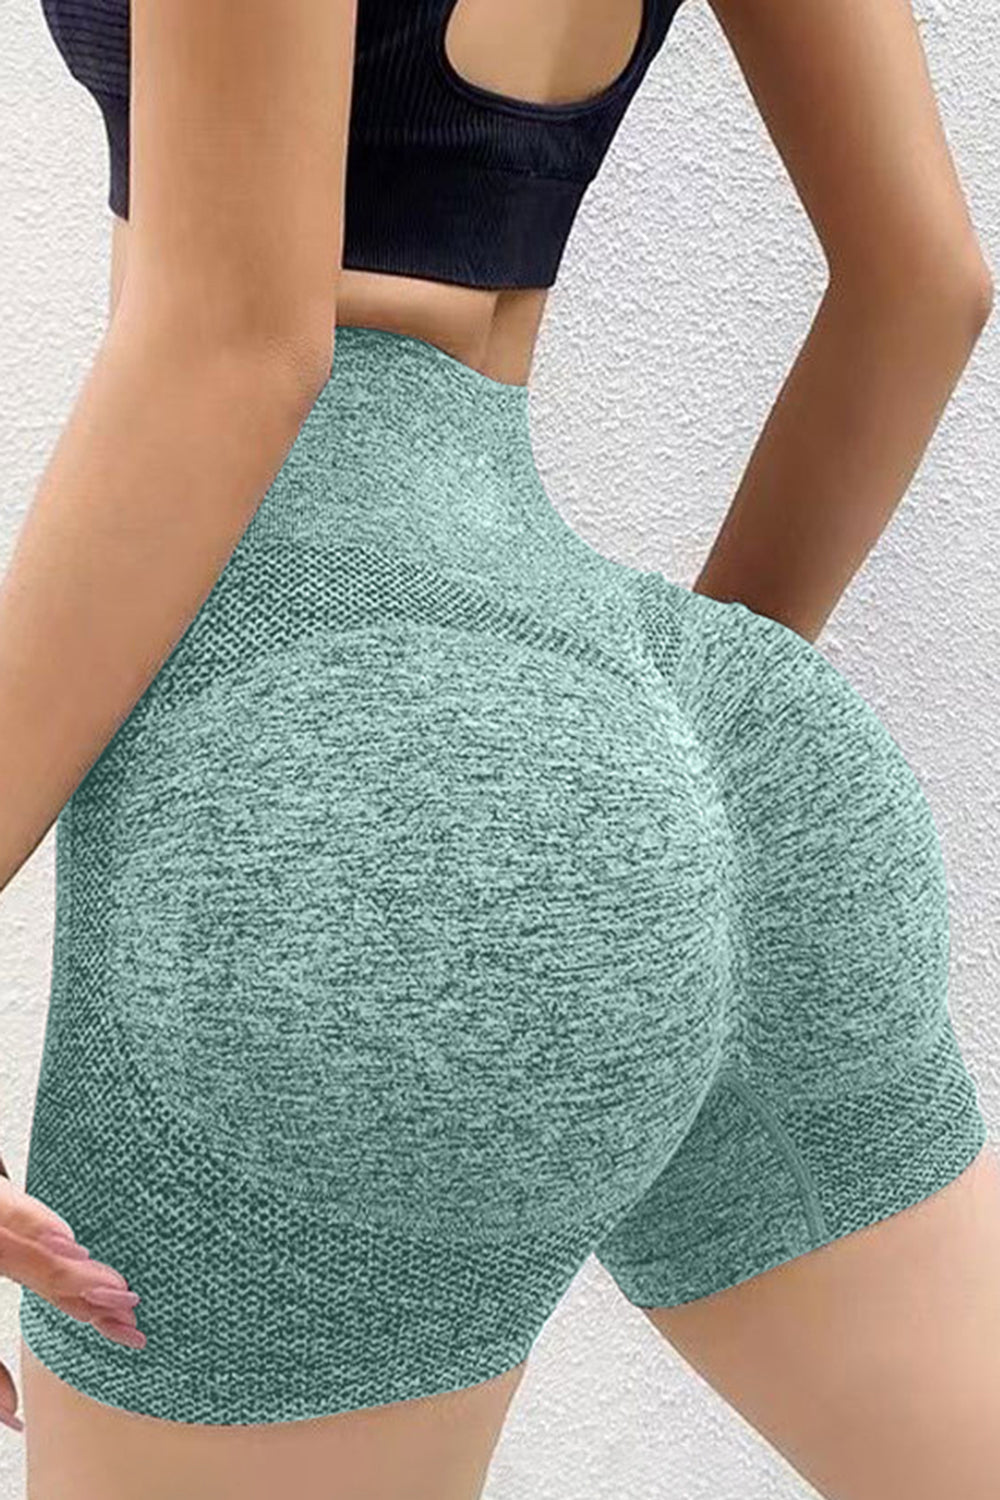 Scrunch Butt Lifting High Rise Activewear Seamless Athletic Contour Active Shorts